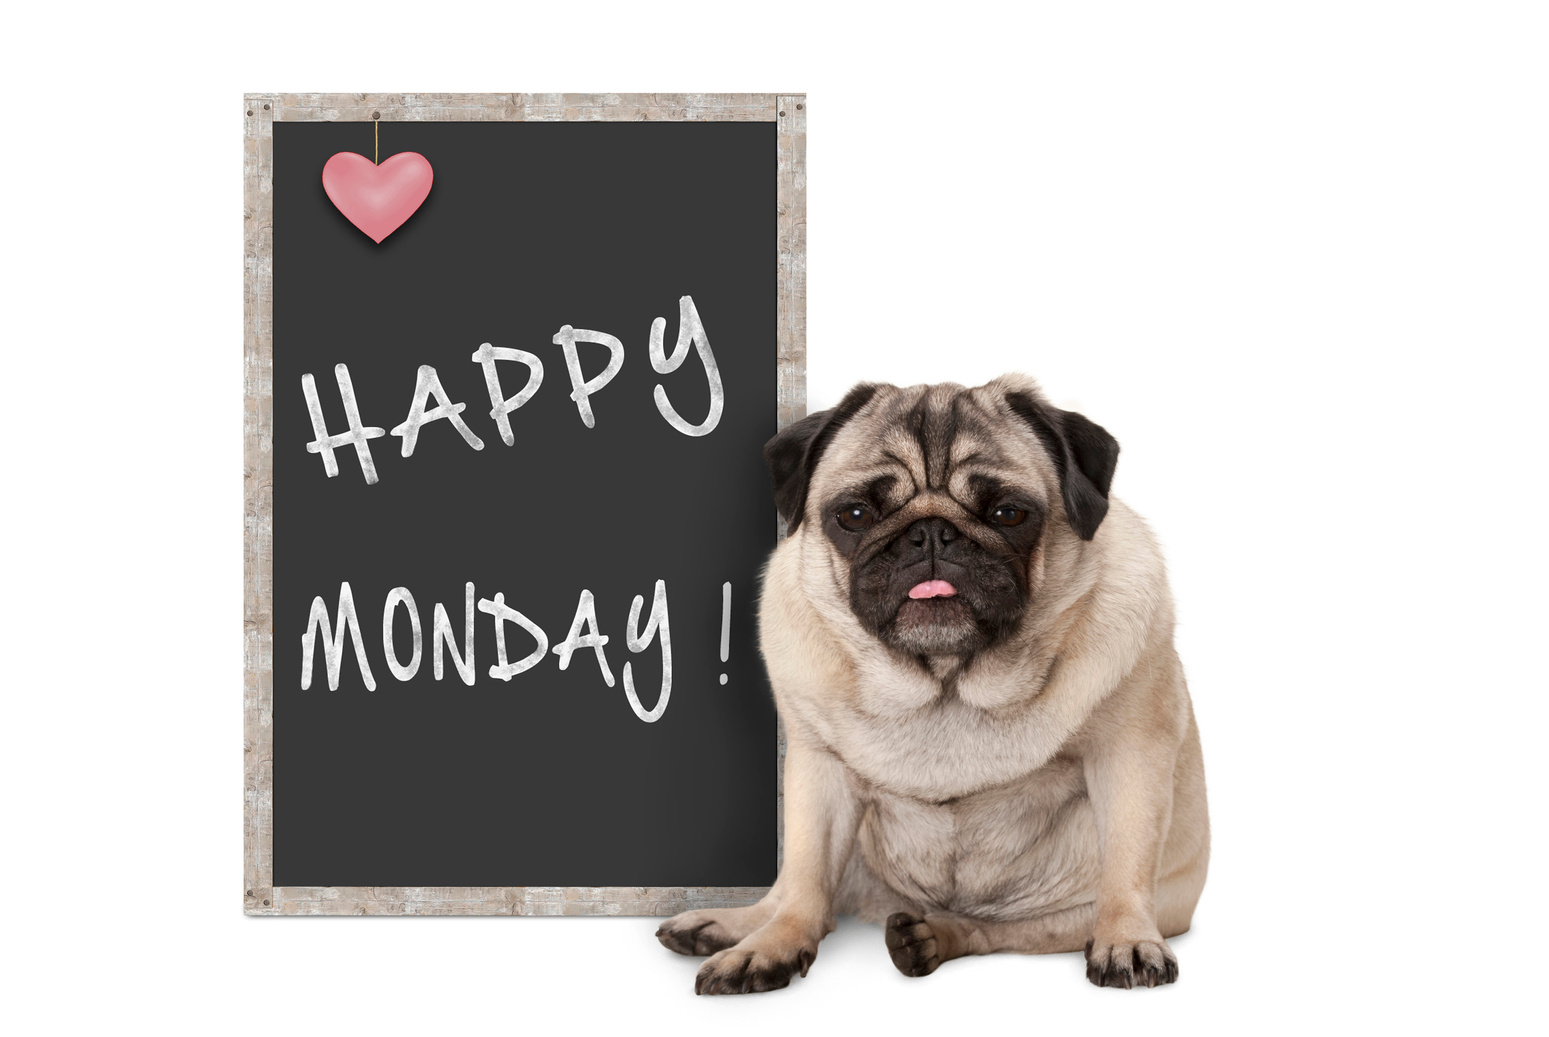 cute grumpy pug puppy dog with bad monday morning mood, sitting next to blackboard sign with text happy monday